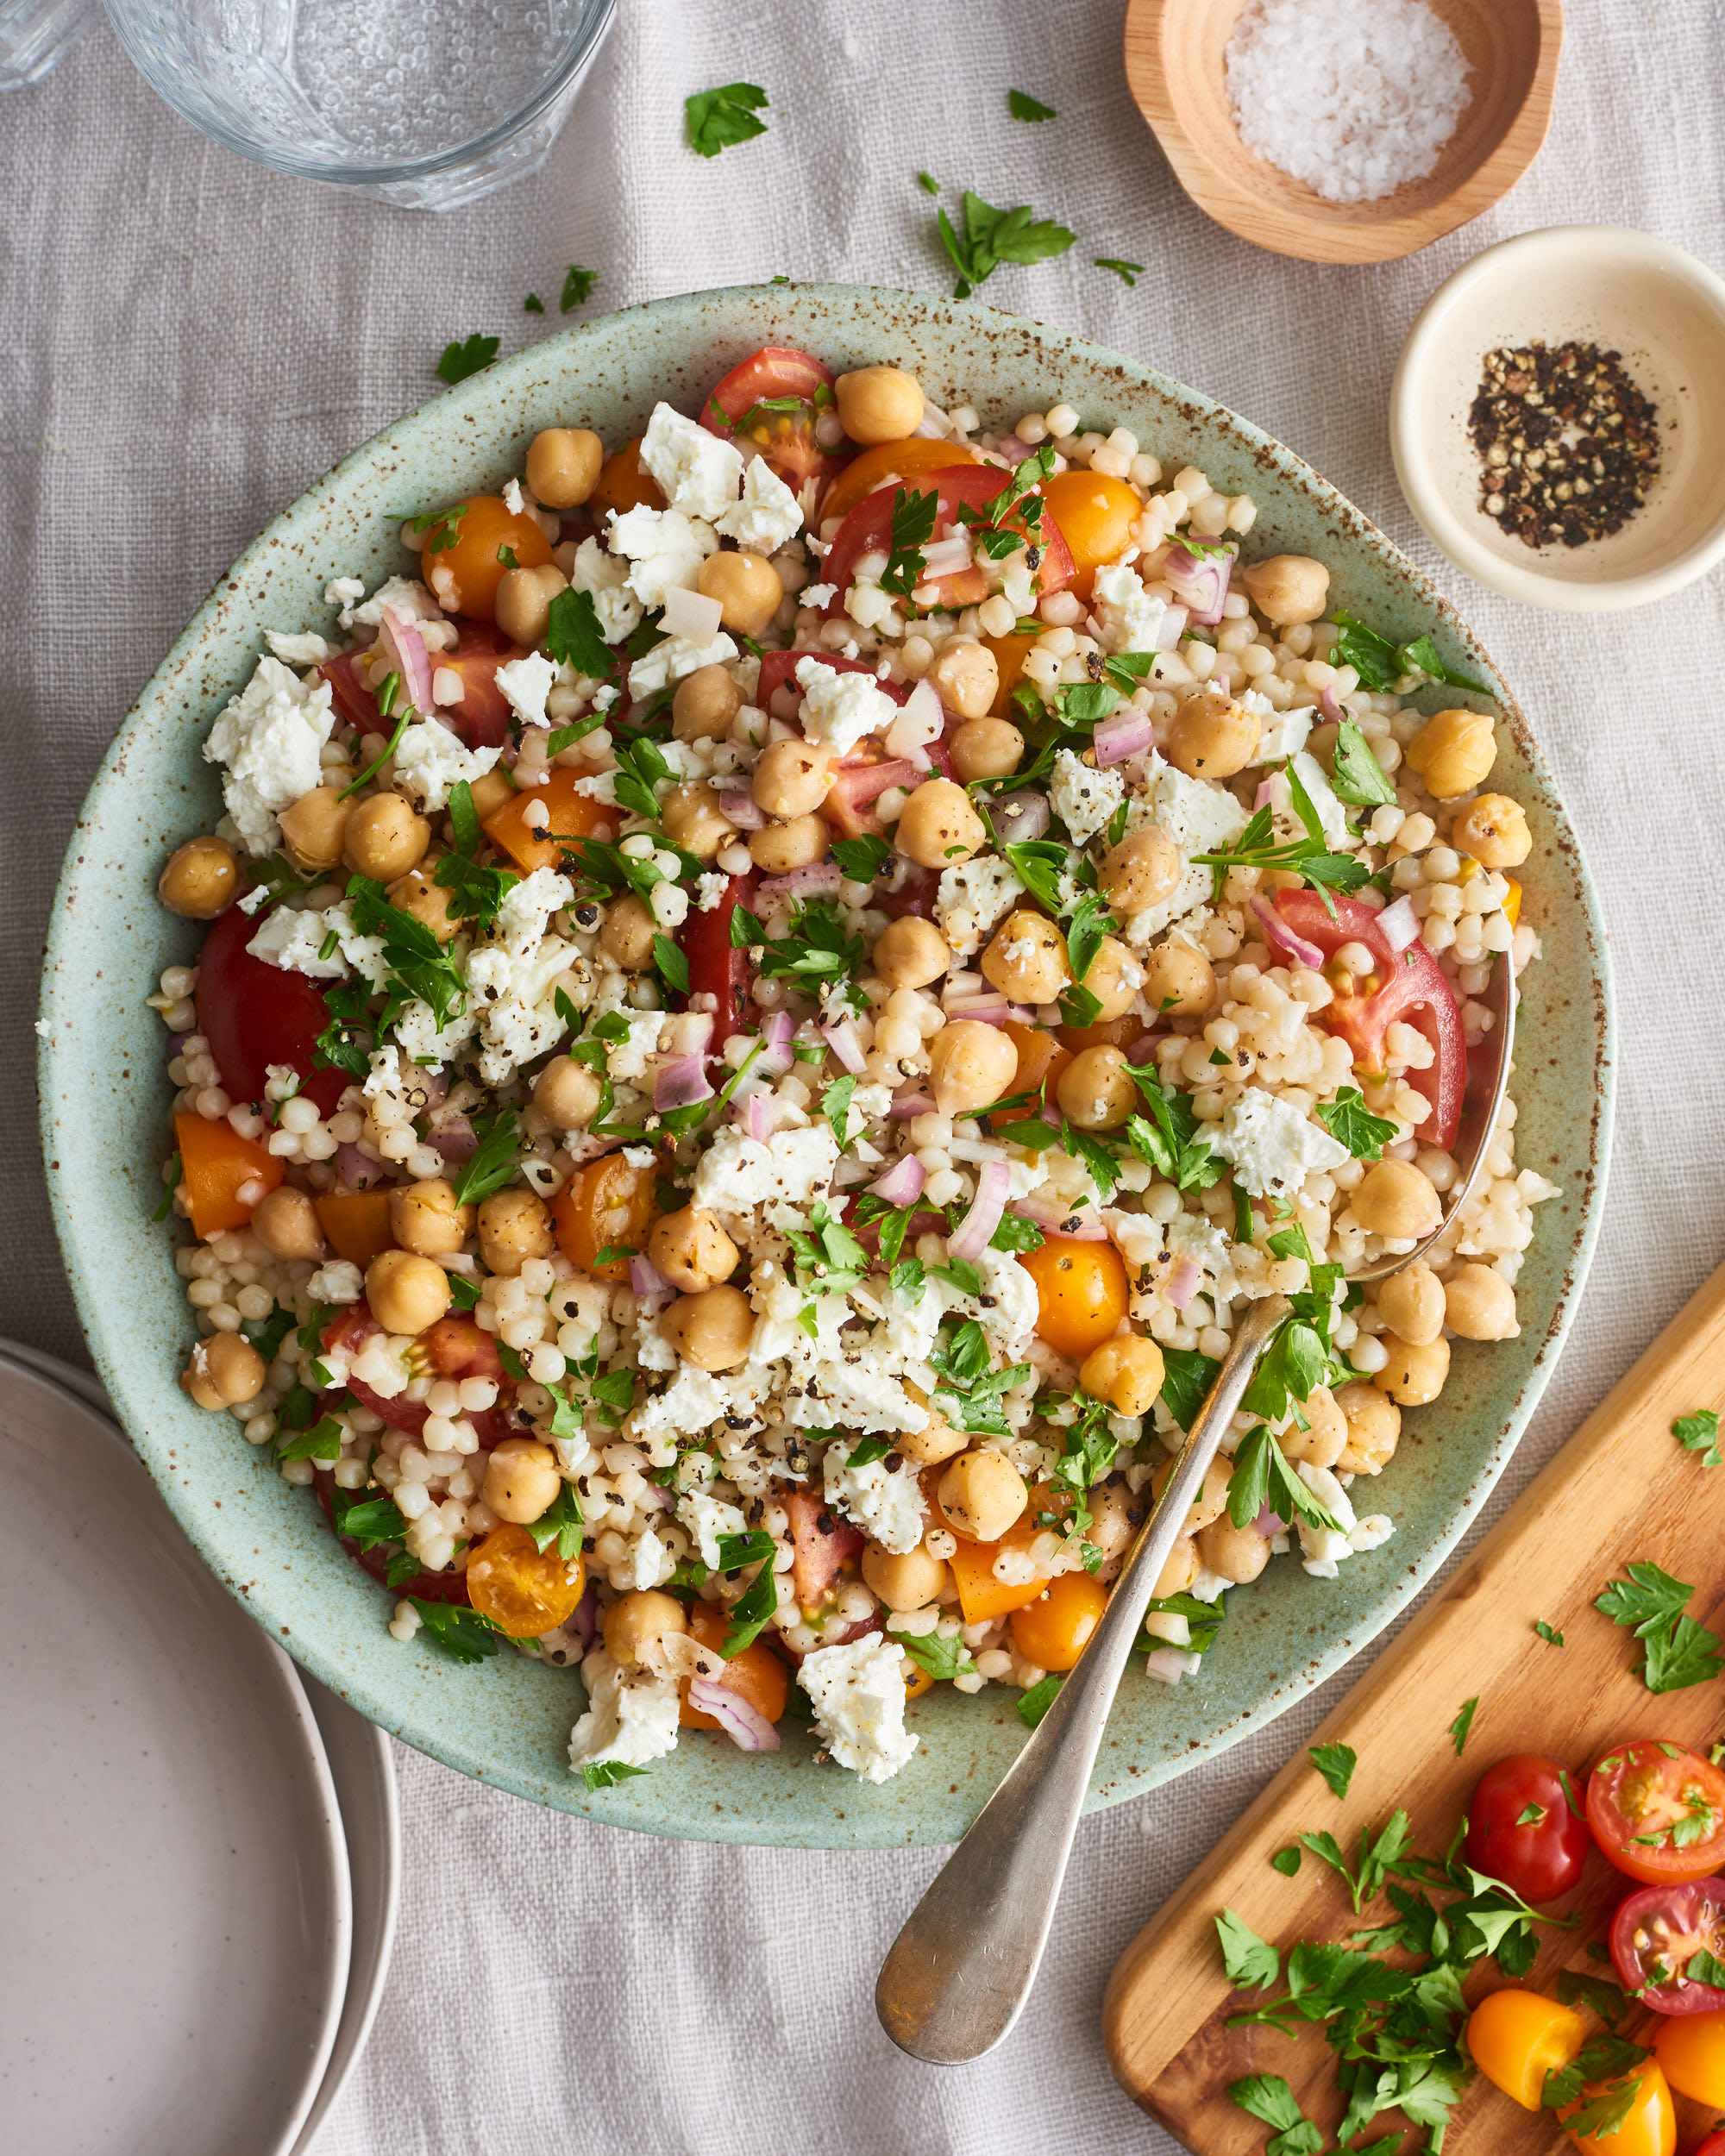 Israeli Couscous Salad with Feta, Chickpeas, and Herbs